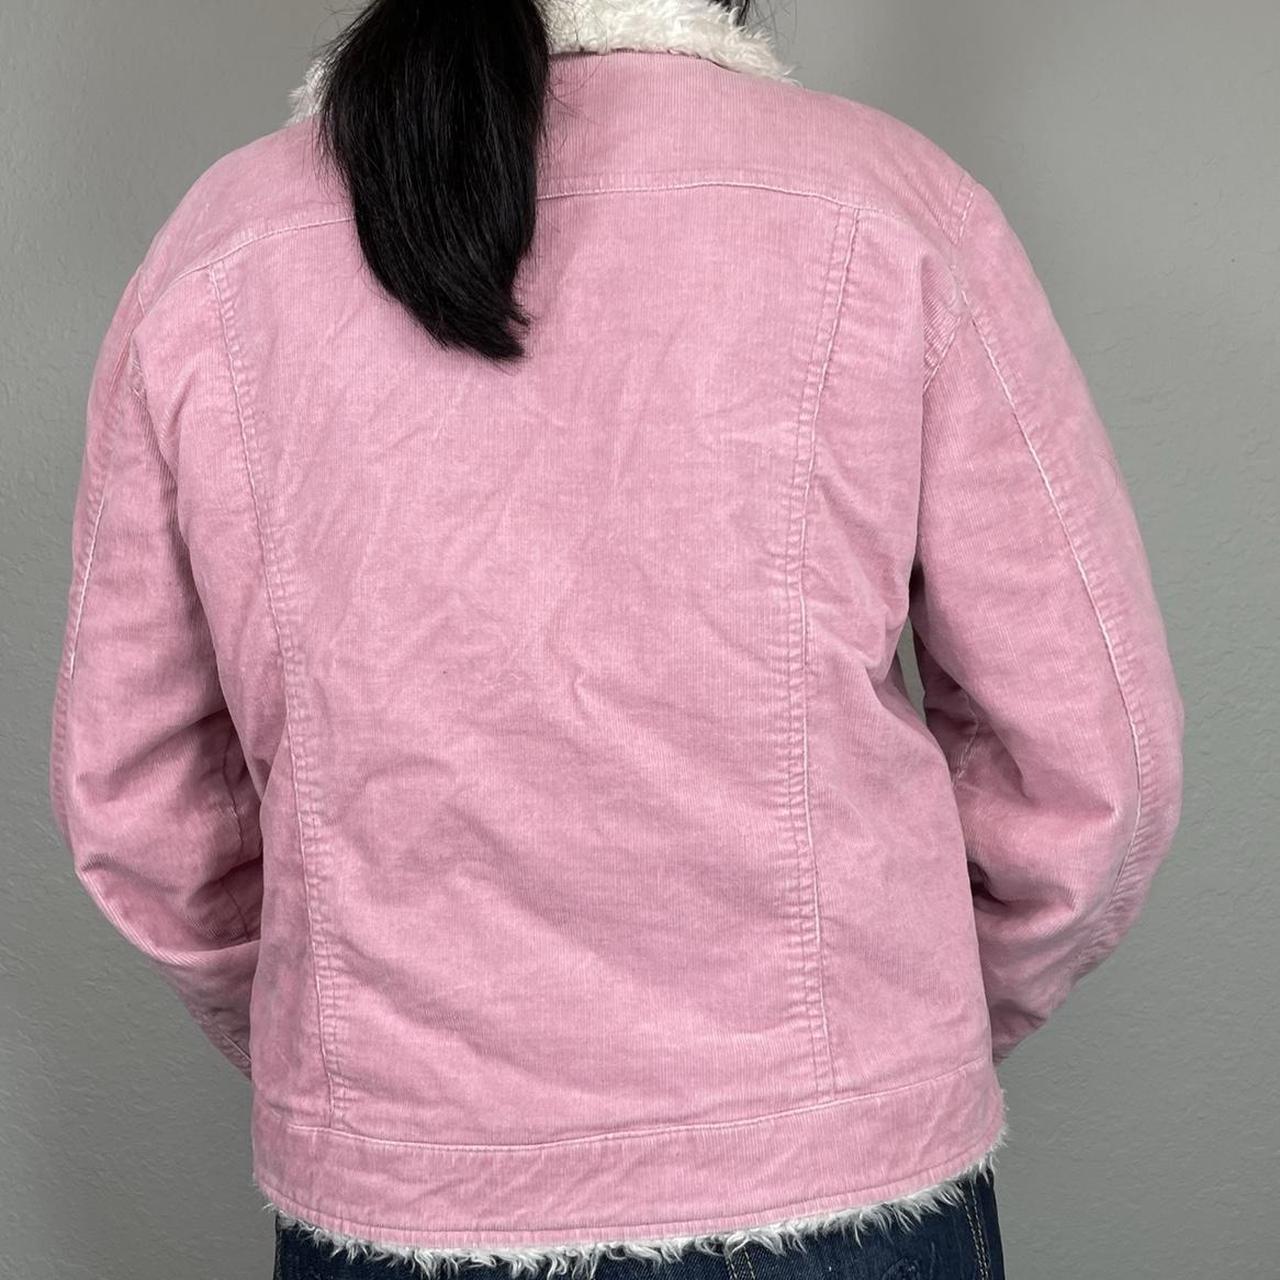 Women's Pink and Cream Jacket (4)